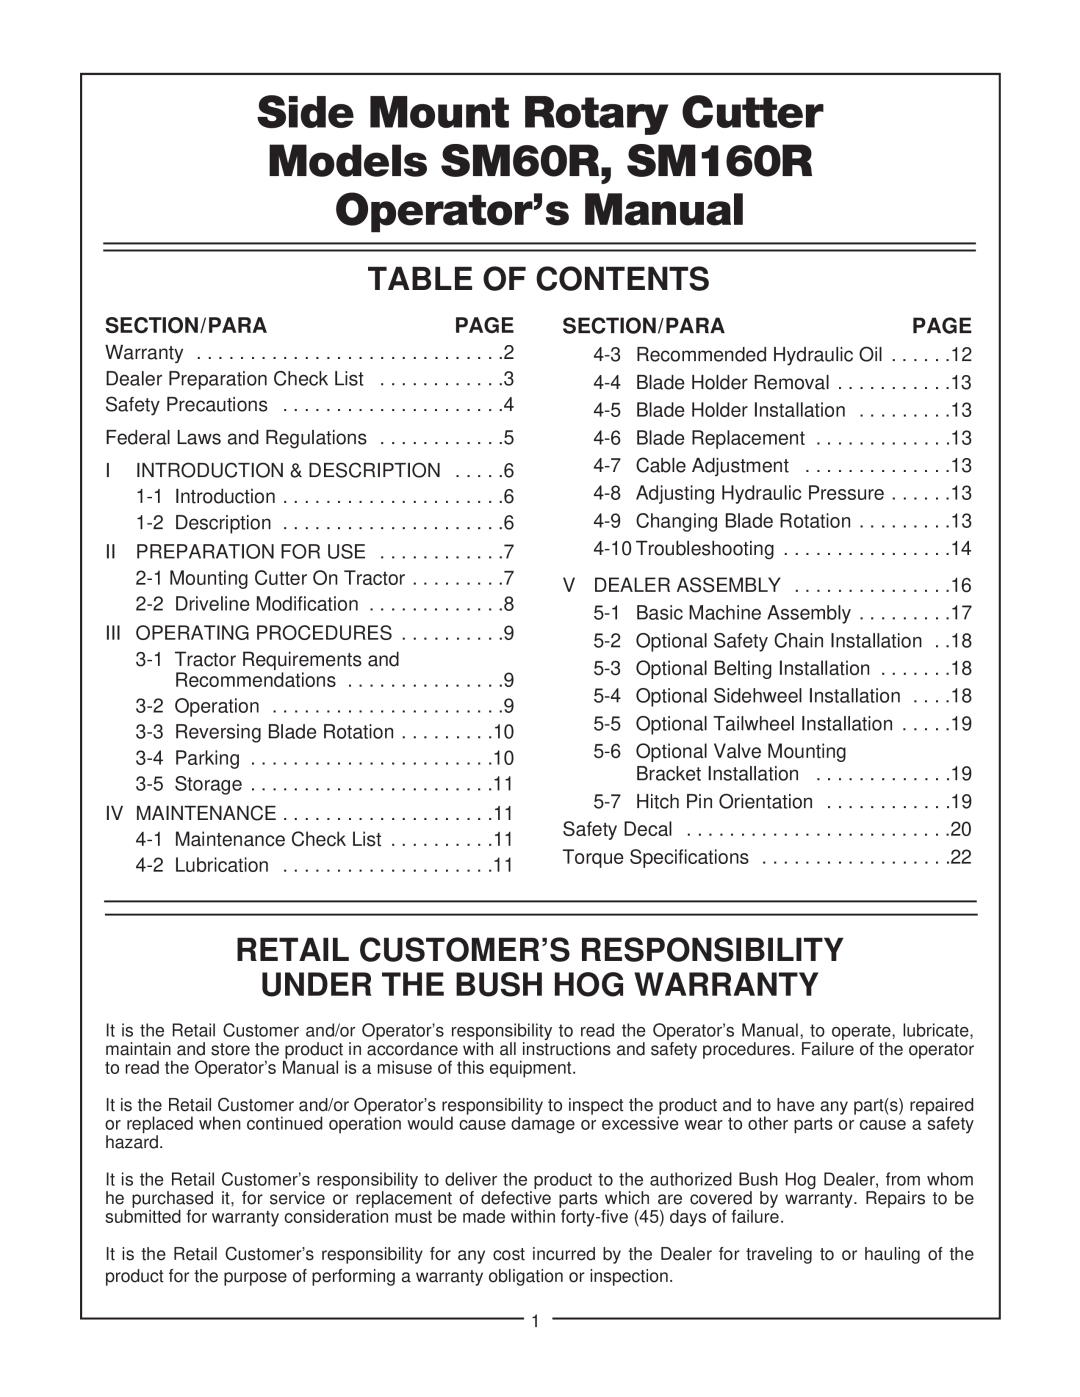 Bush Hog SM 60 manual Table Of Contents, Retail Customer’S Responsibility, Under The Bush Hog Warranty, Section/Parapage 